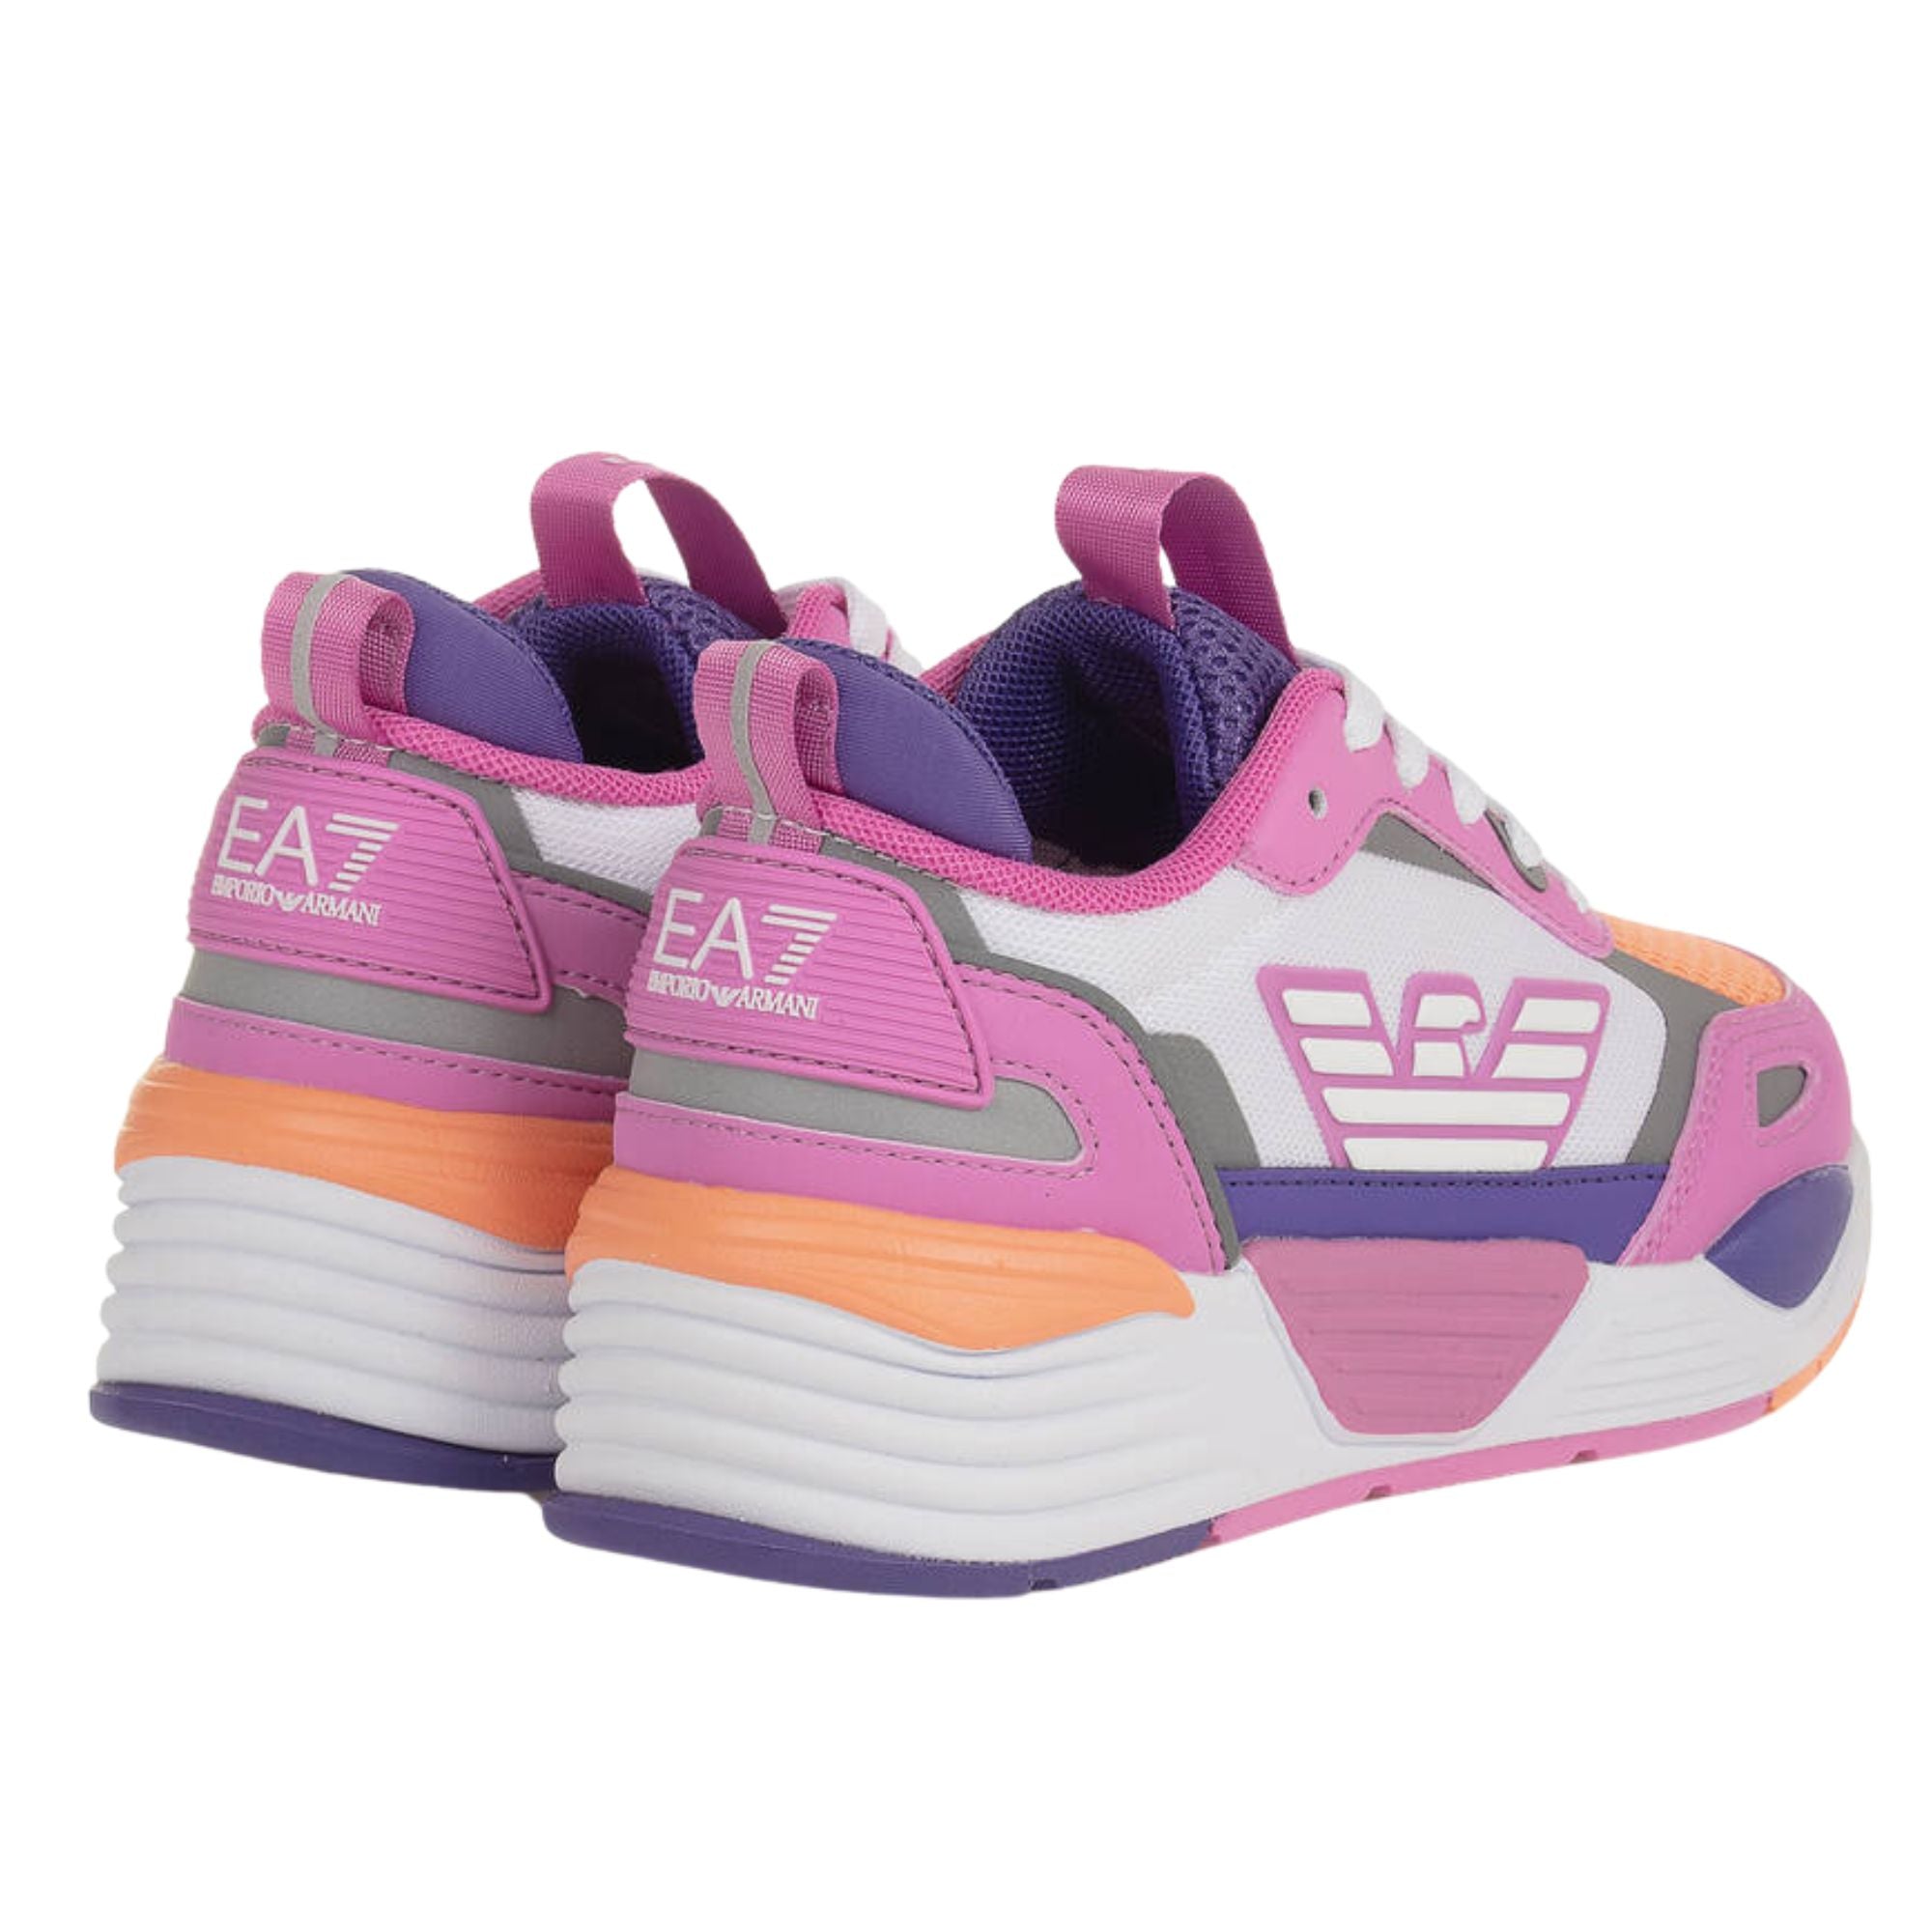 Emporio Armani Ace Runner Pink Sneakers